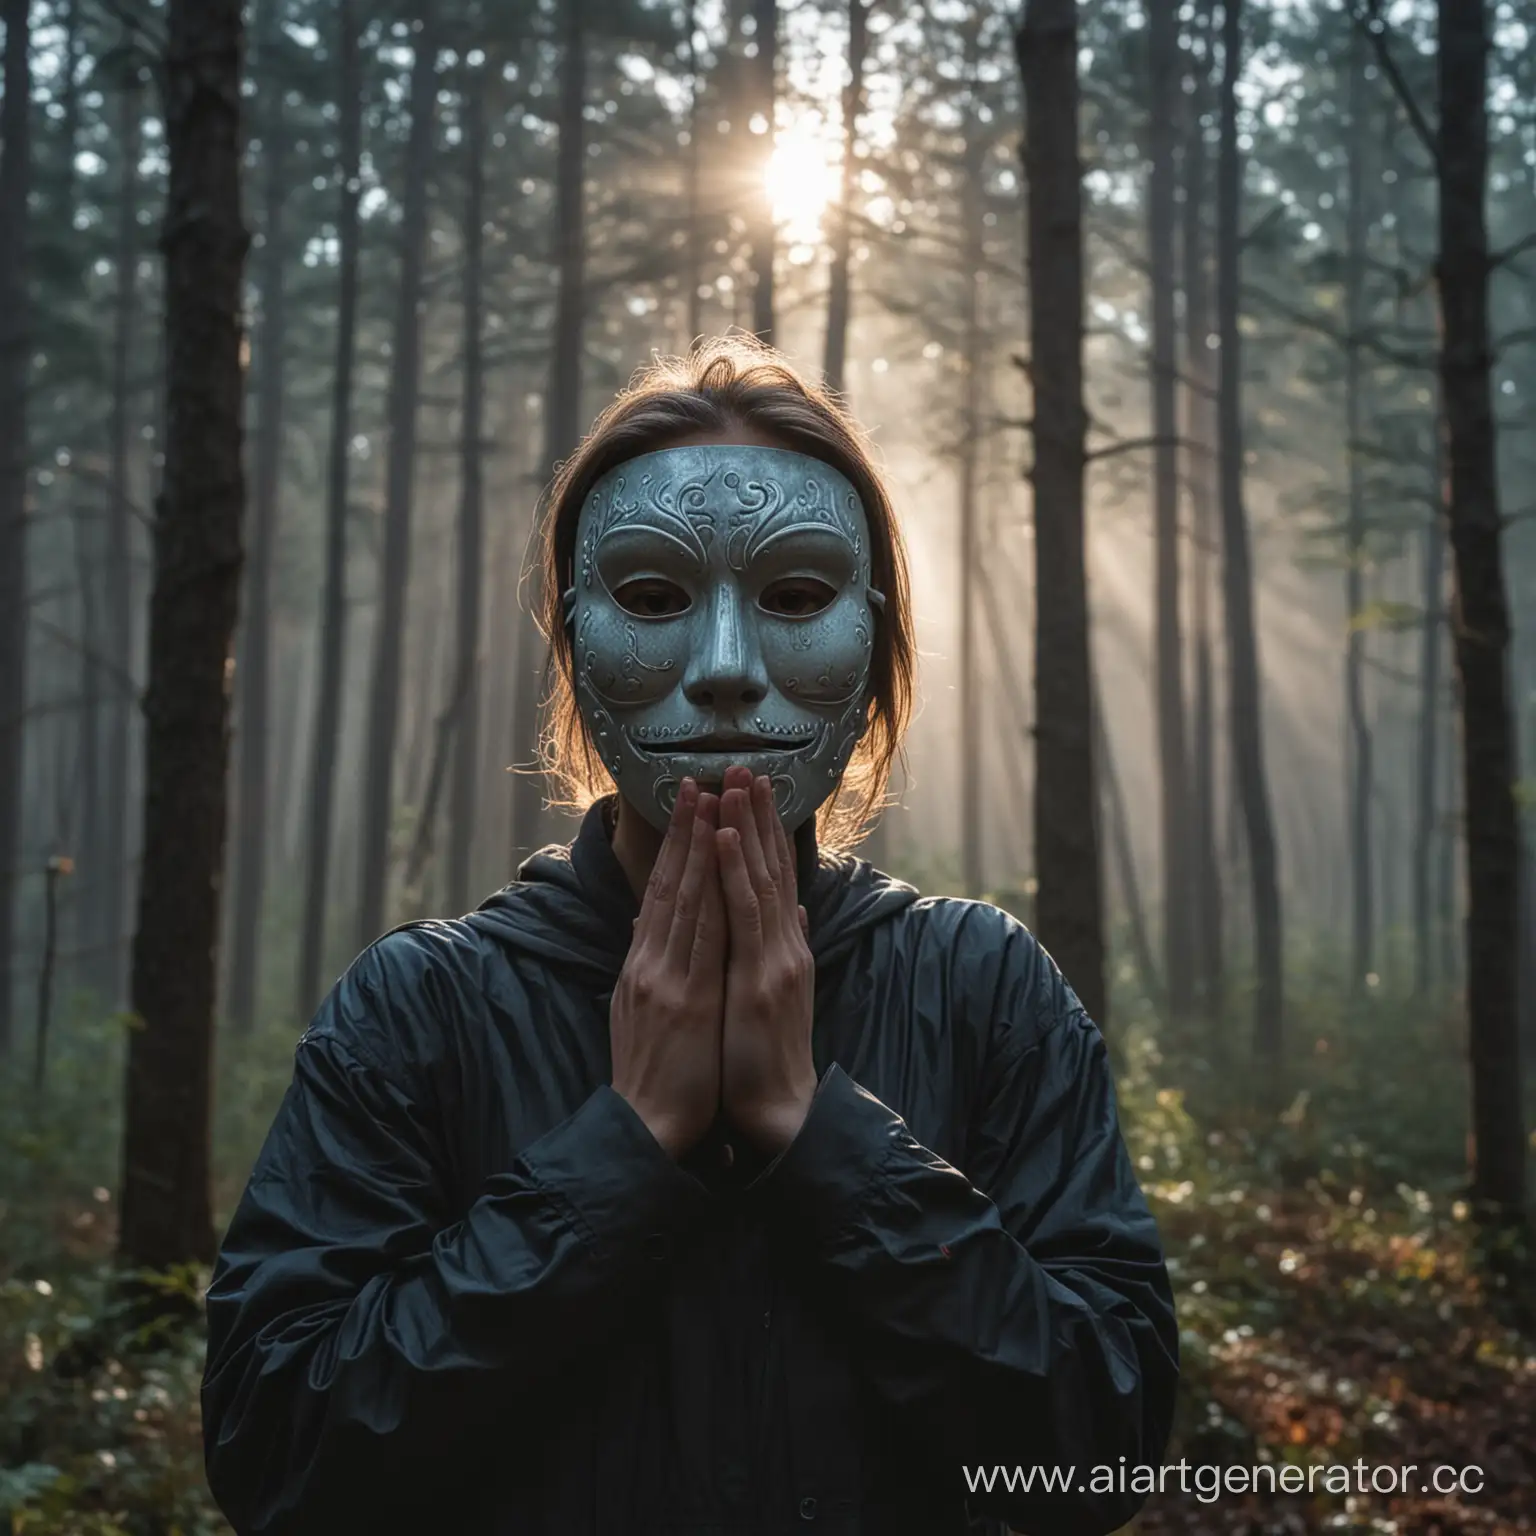 Mysterious-Figure-Wearing-FullFace-Mask-in-Enigmatic-Forest-at-Dawn